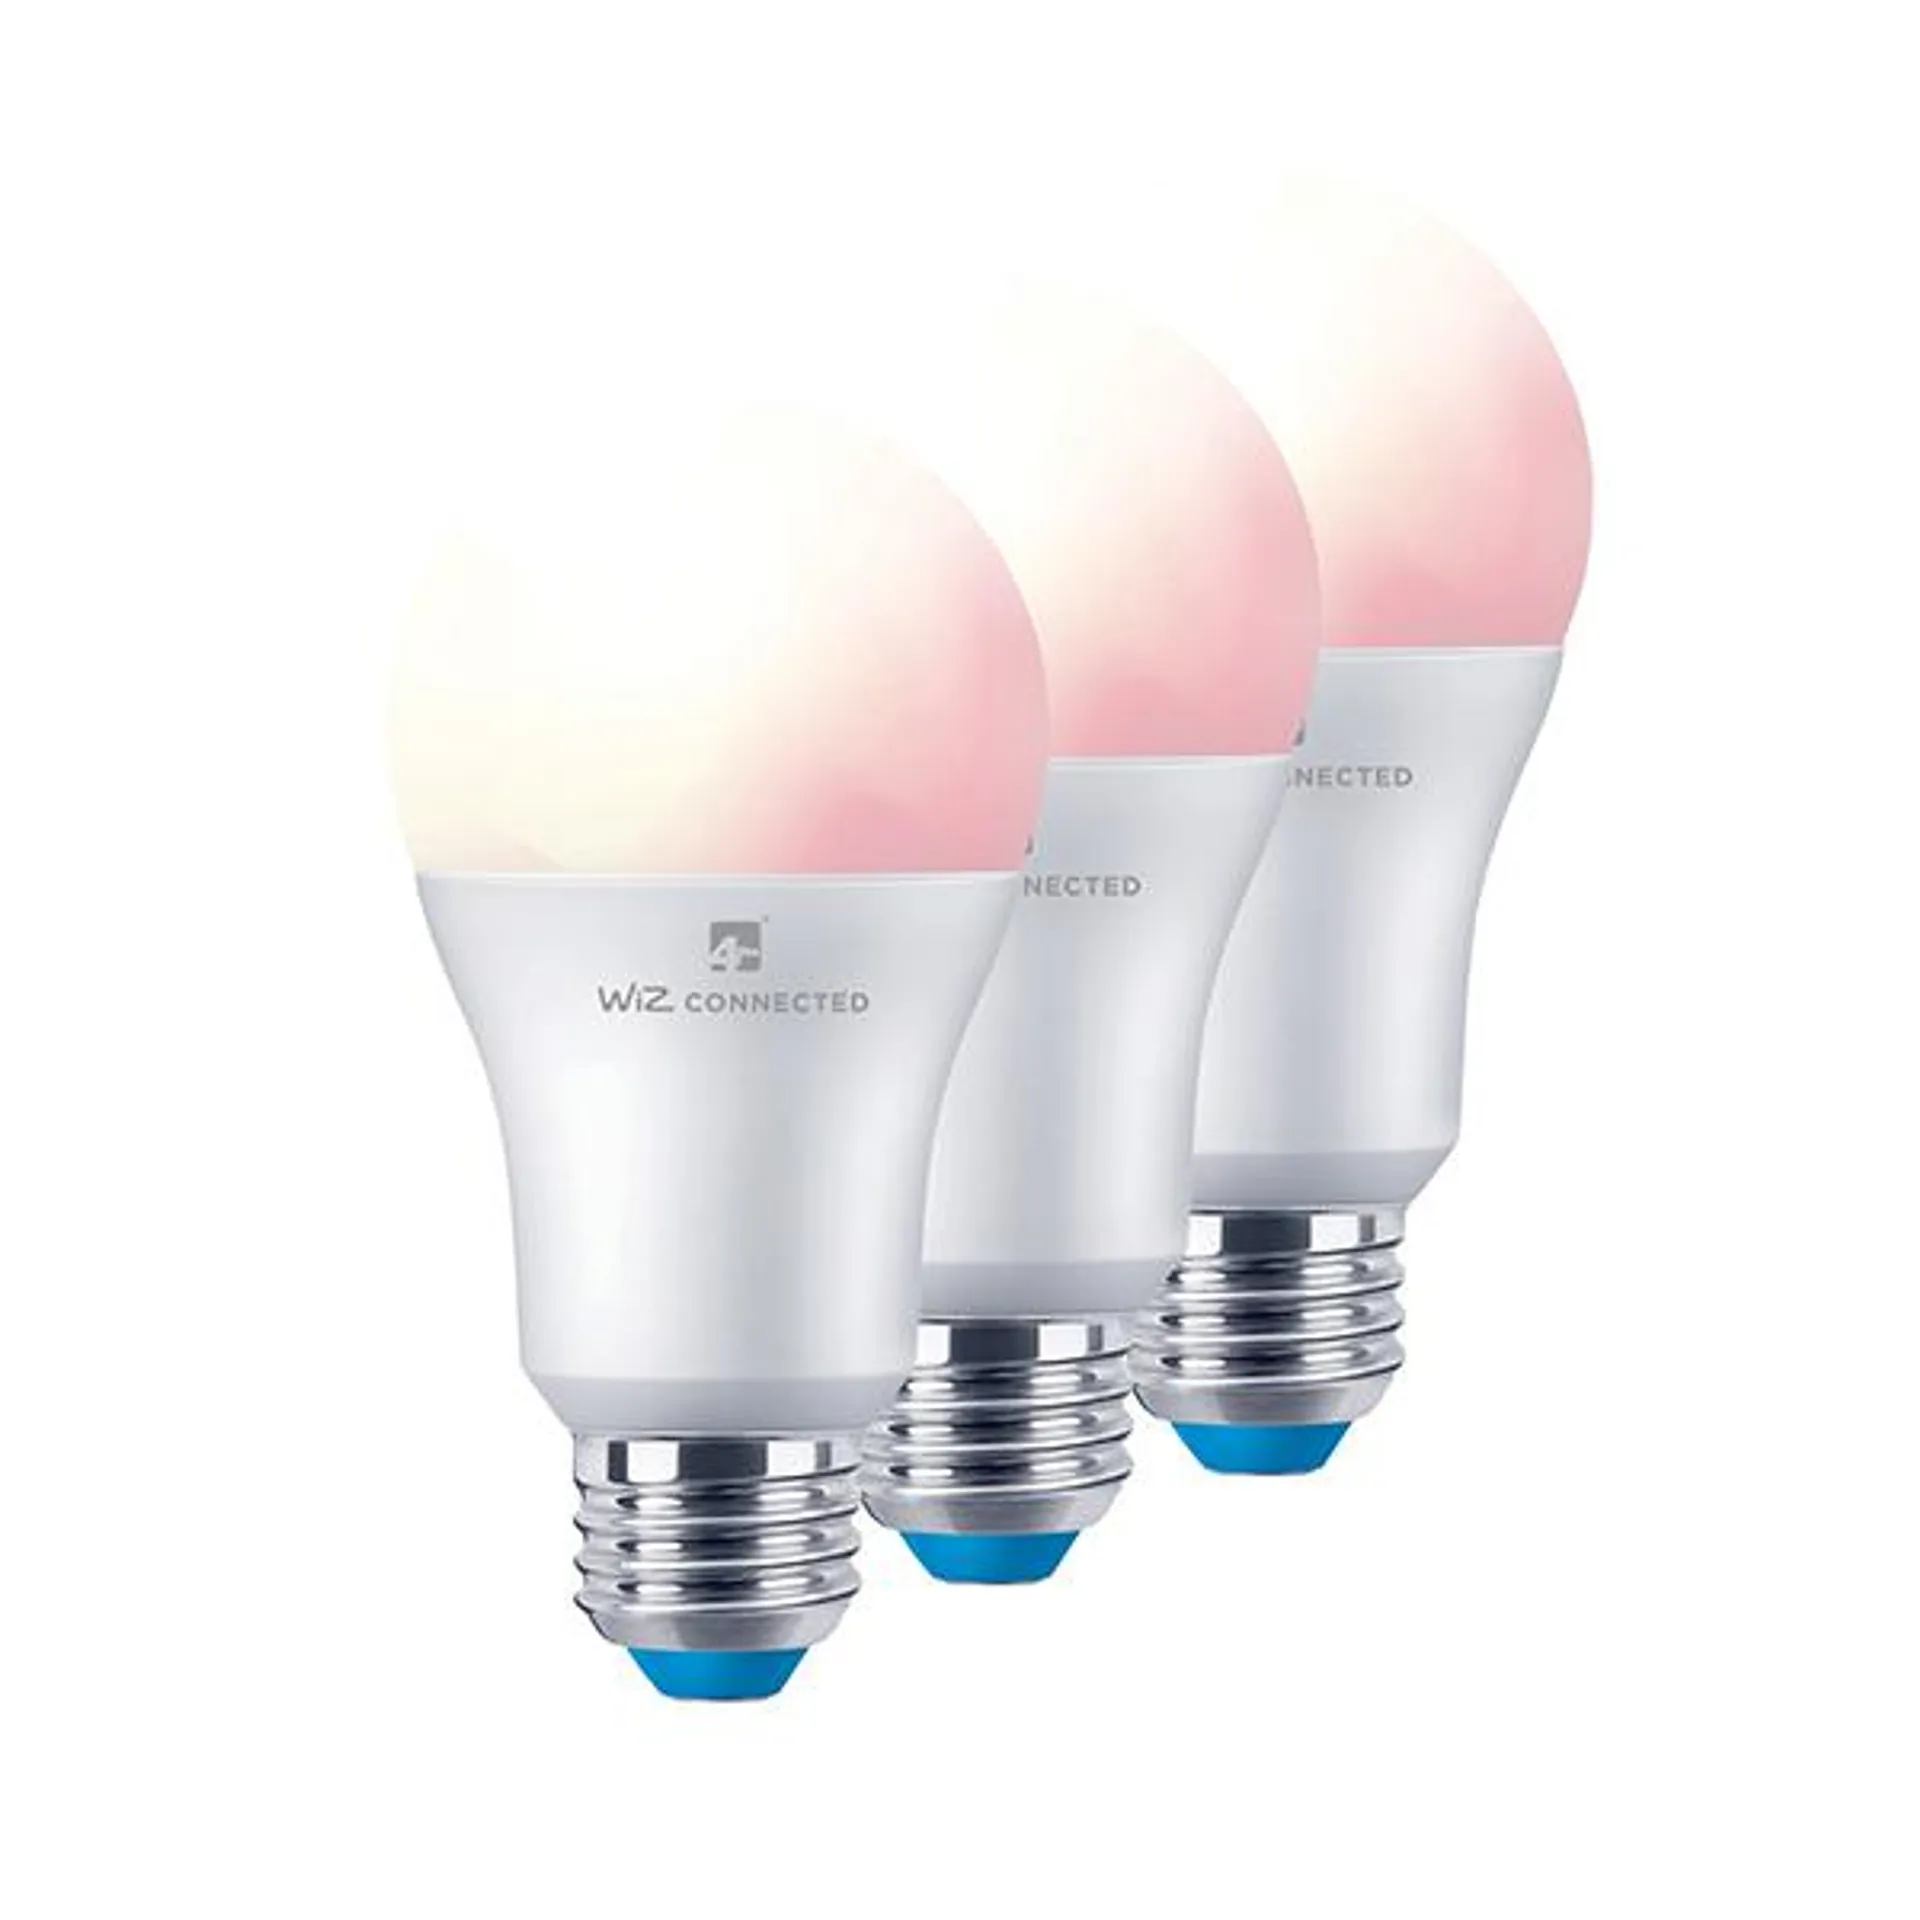 WiZ Smart White and Full Colour Light Bulb with WiFi and Bluetooth Connectivity - 3 Pack